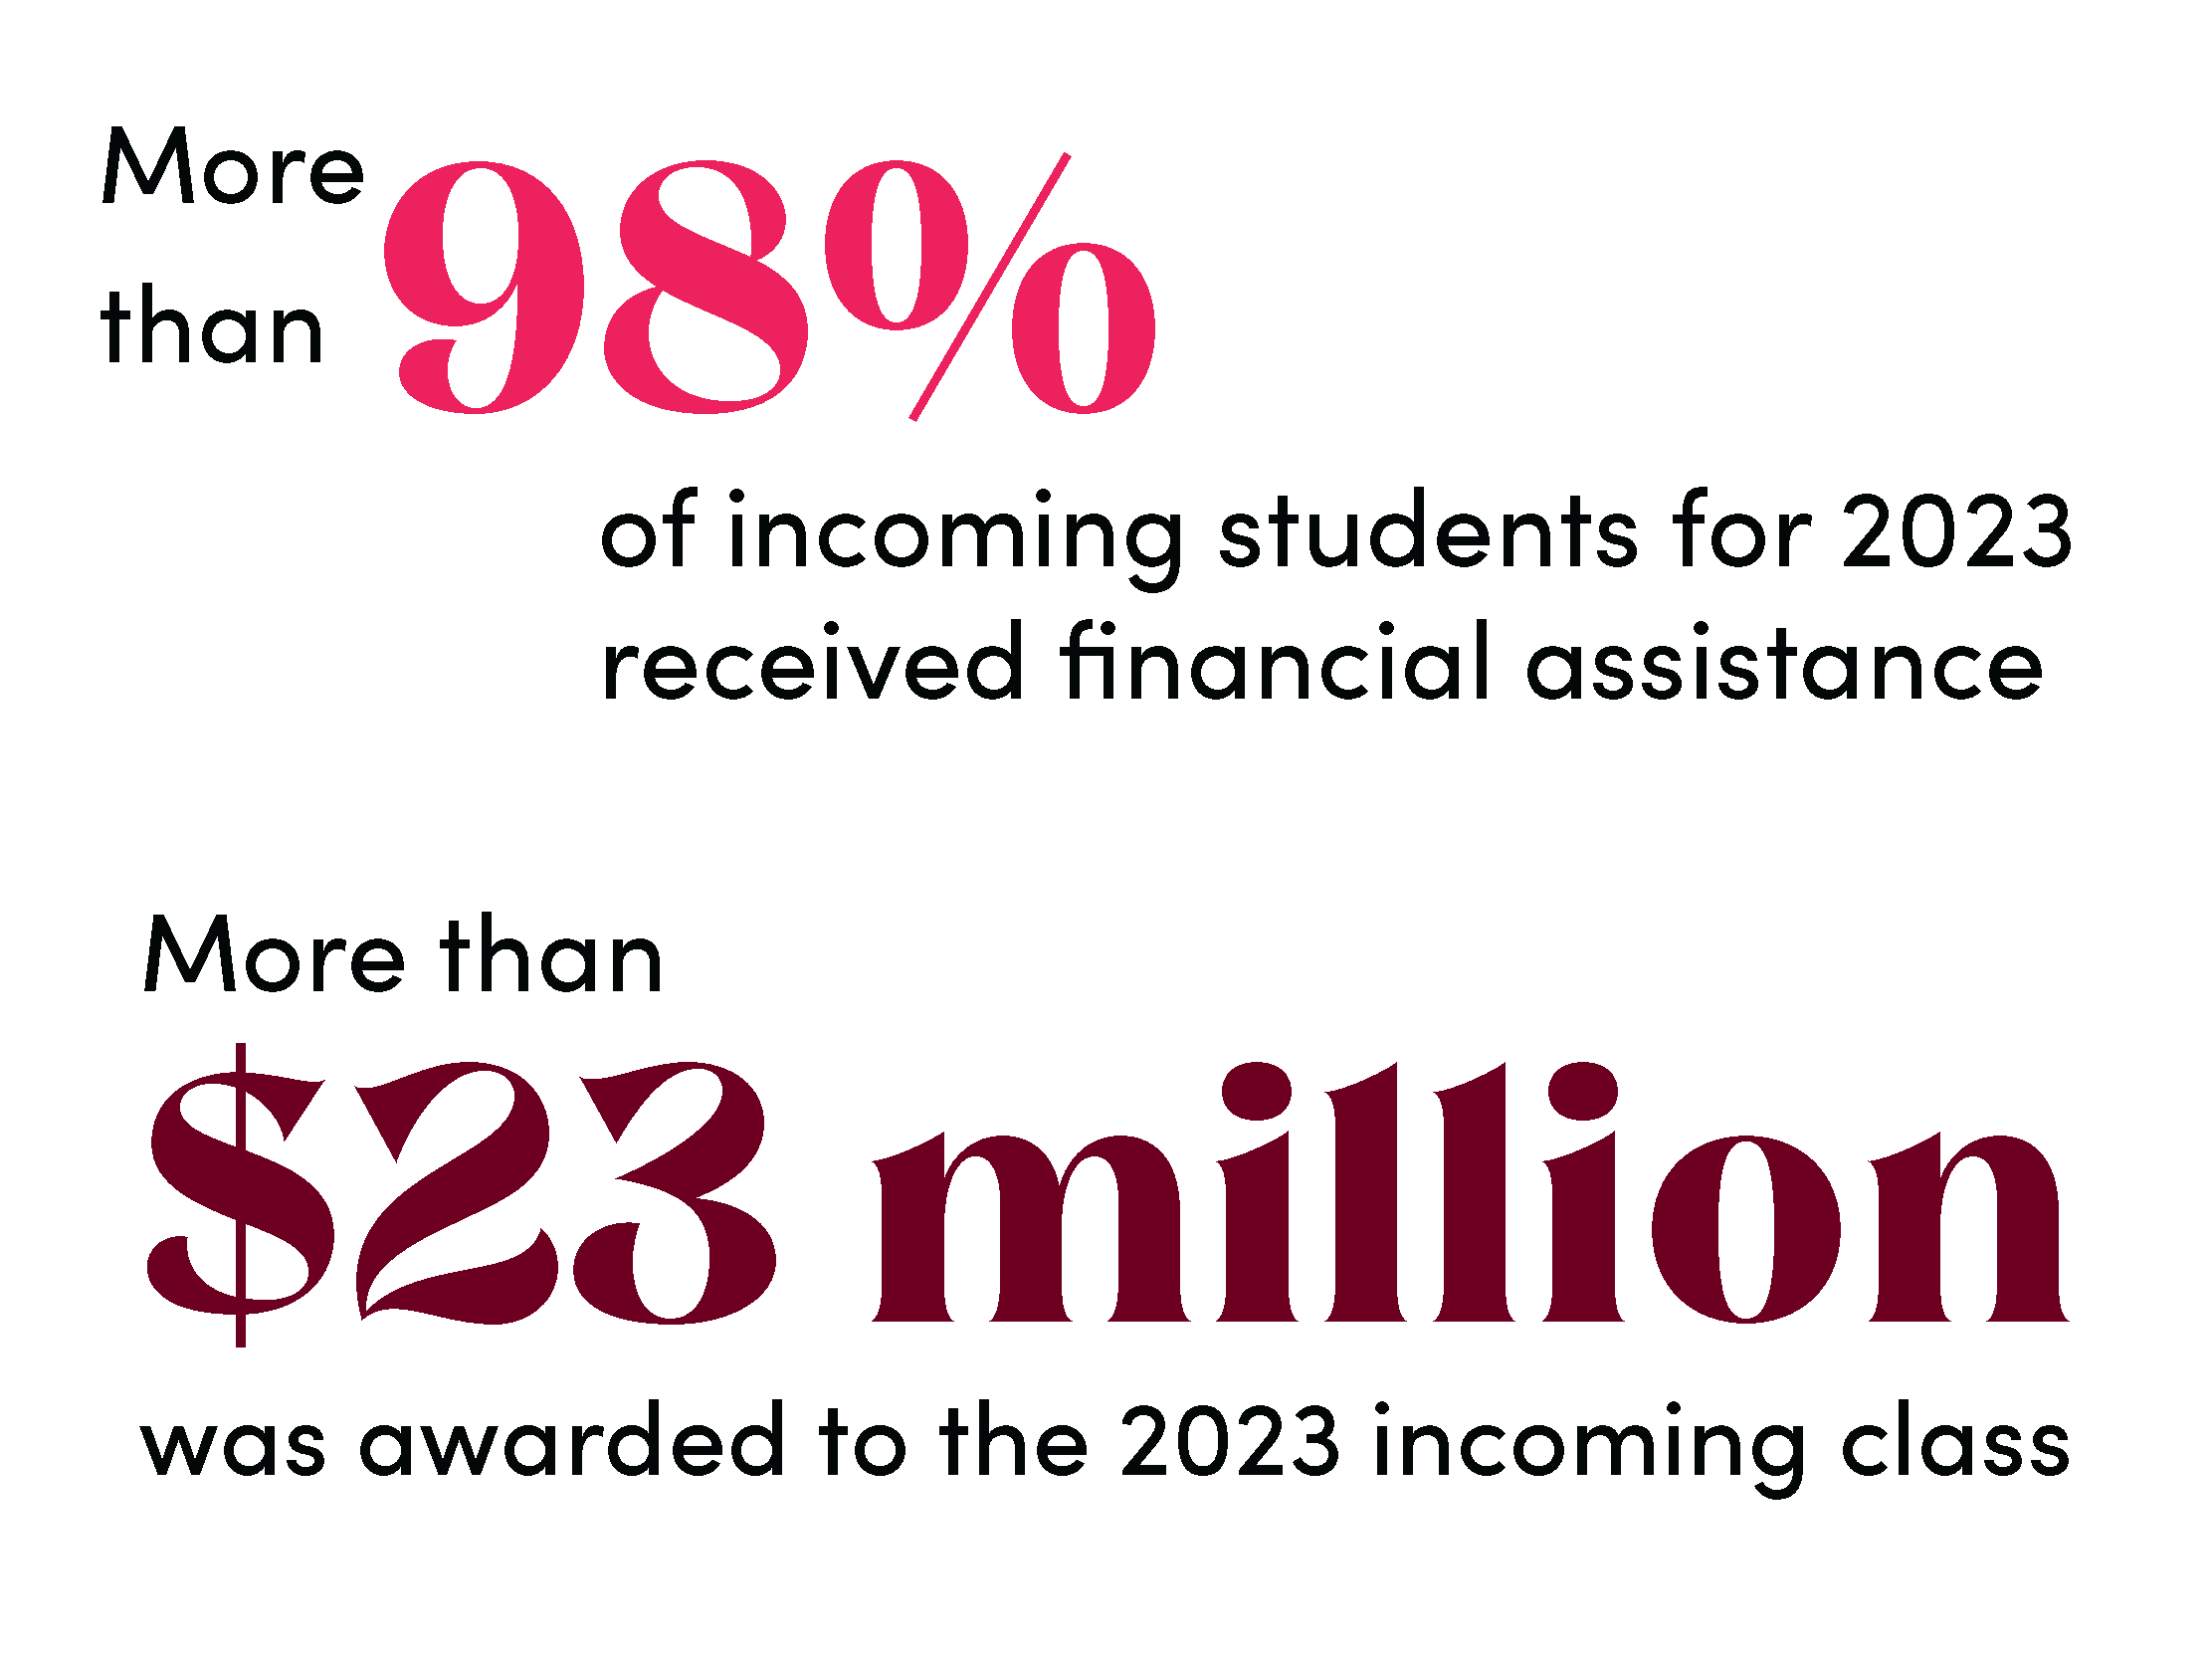 more than 98% of incoming students for 2023 received financial assistance and more than $23 million was awarded to the 2023 incoming class